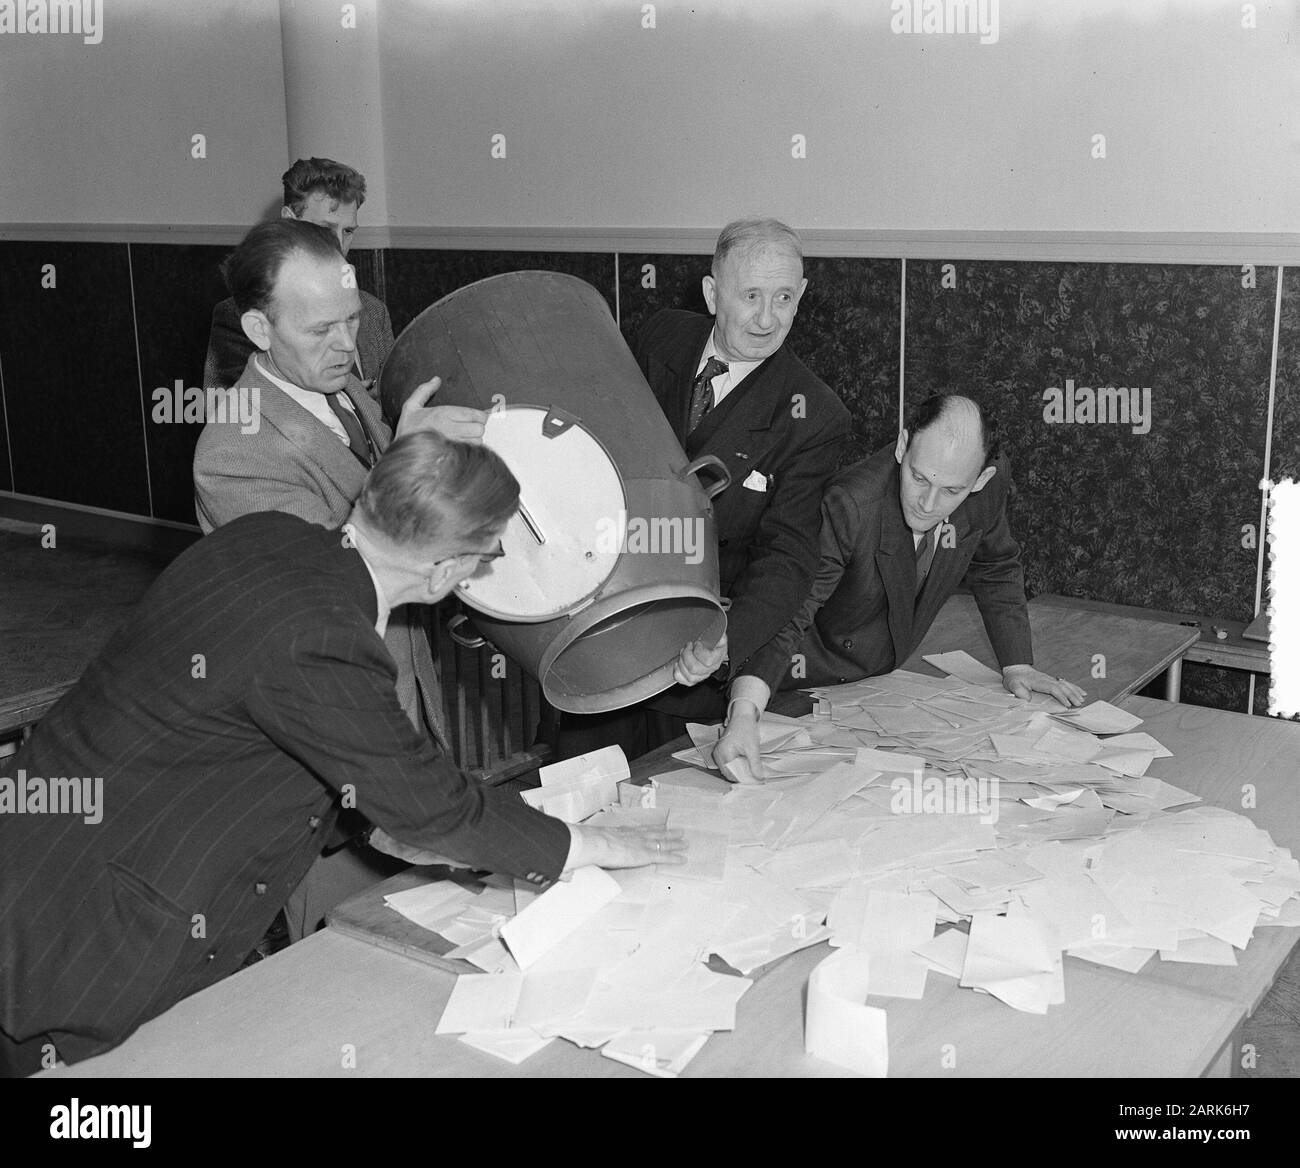 Election Provincial States, the census in polling room Date: April 21, 1954 Keywords: Elections, voting rooms Stock Photo